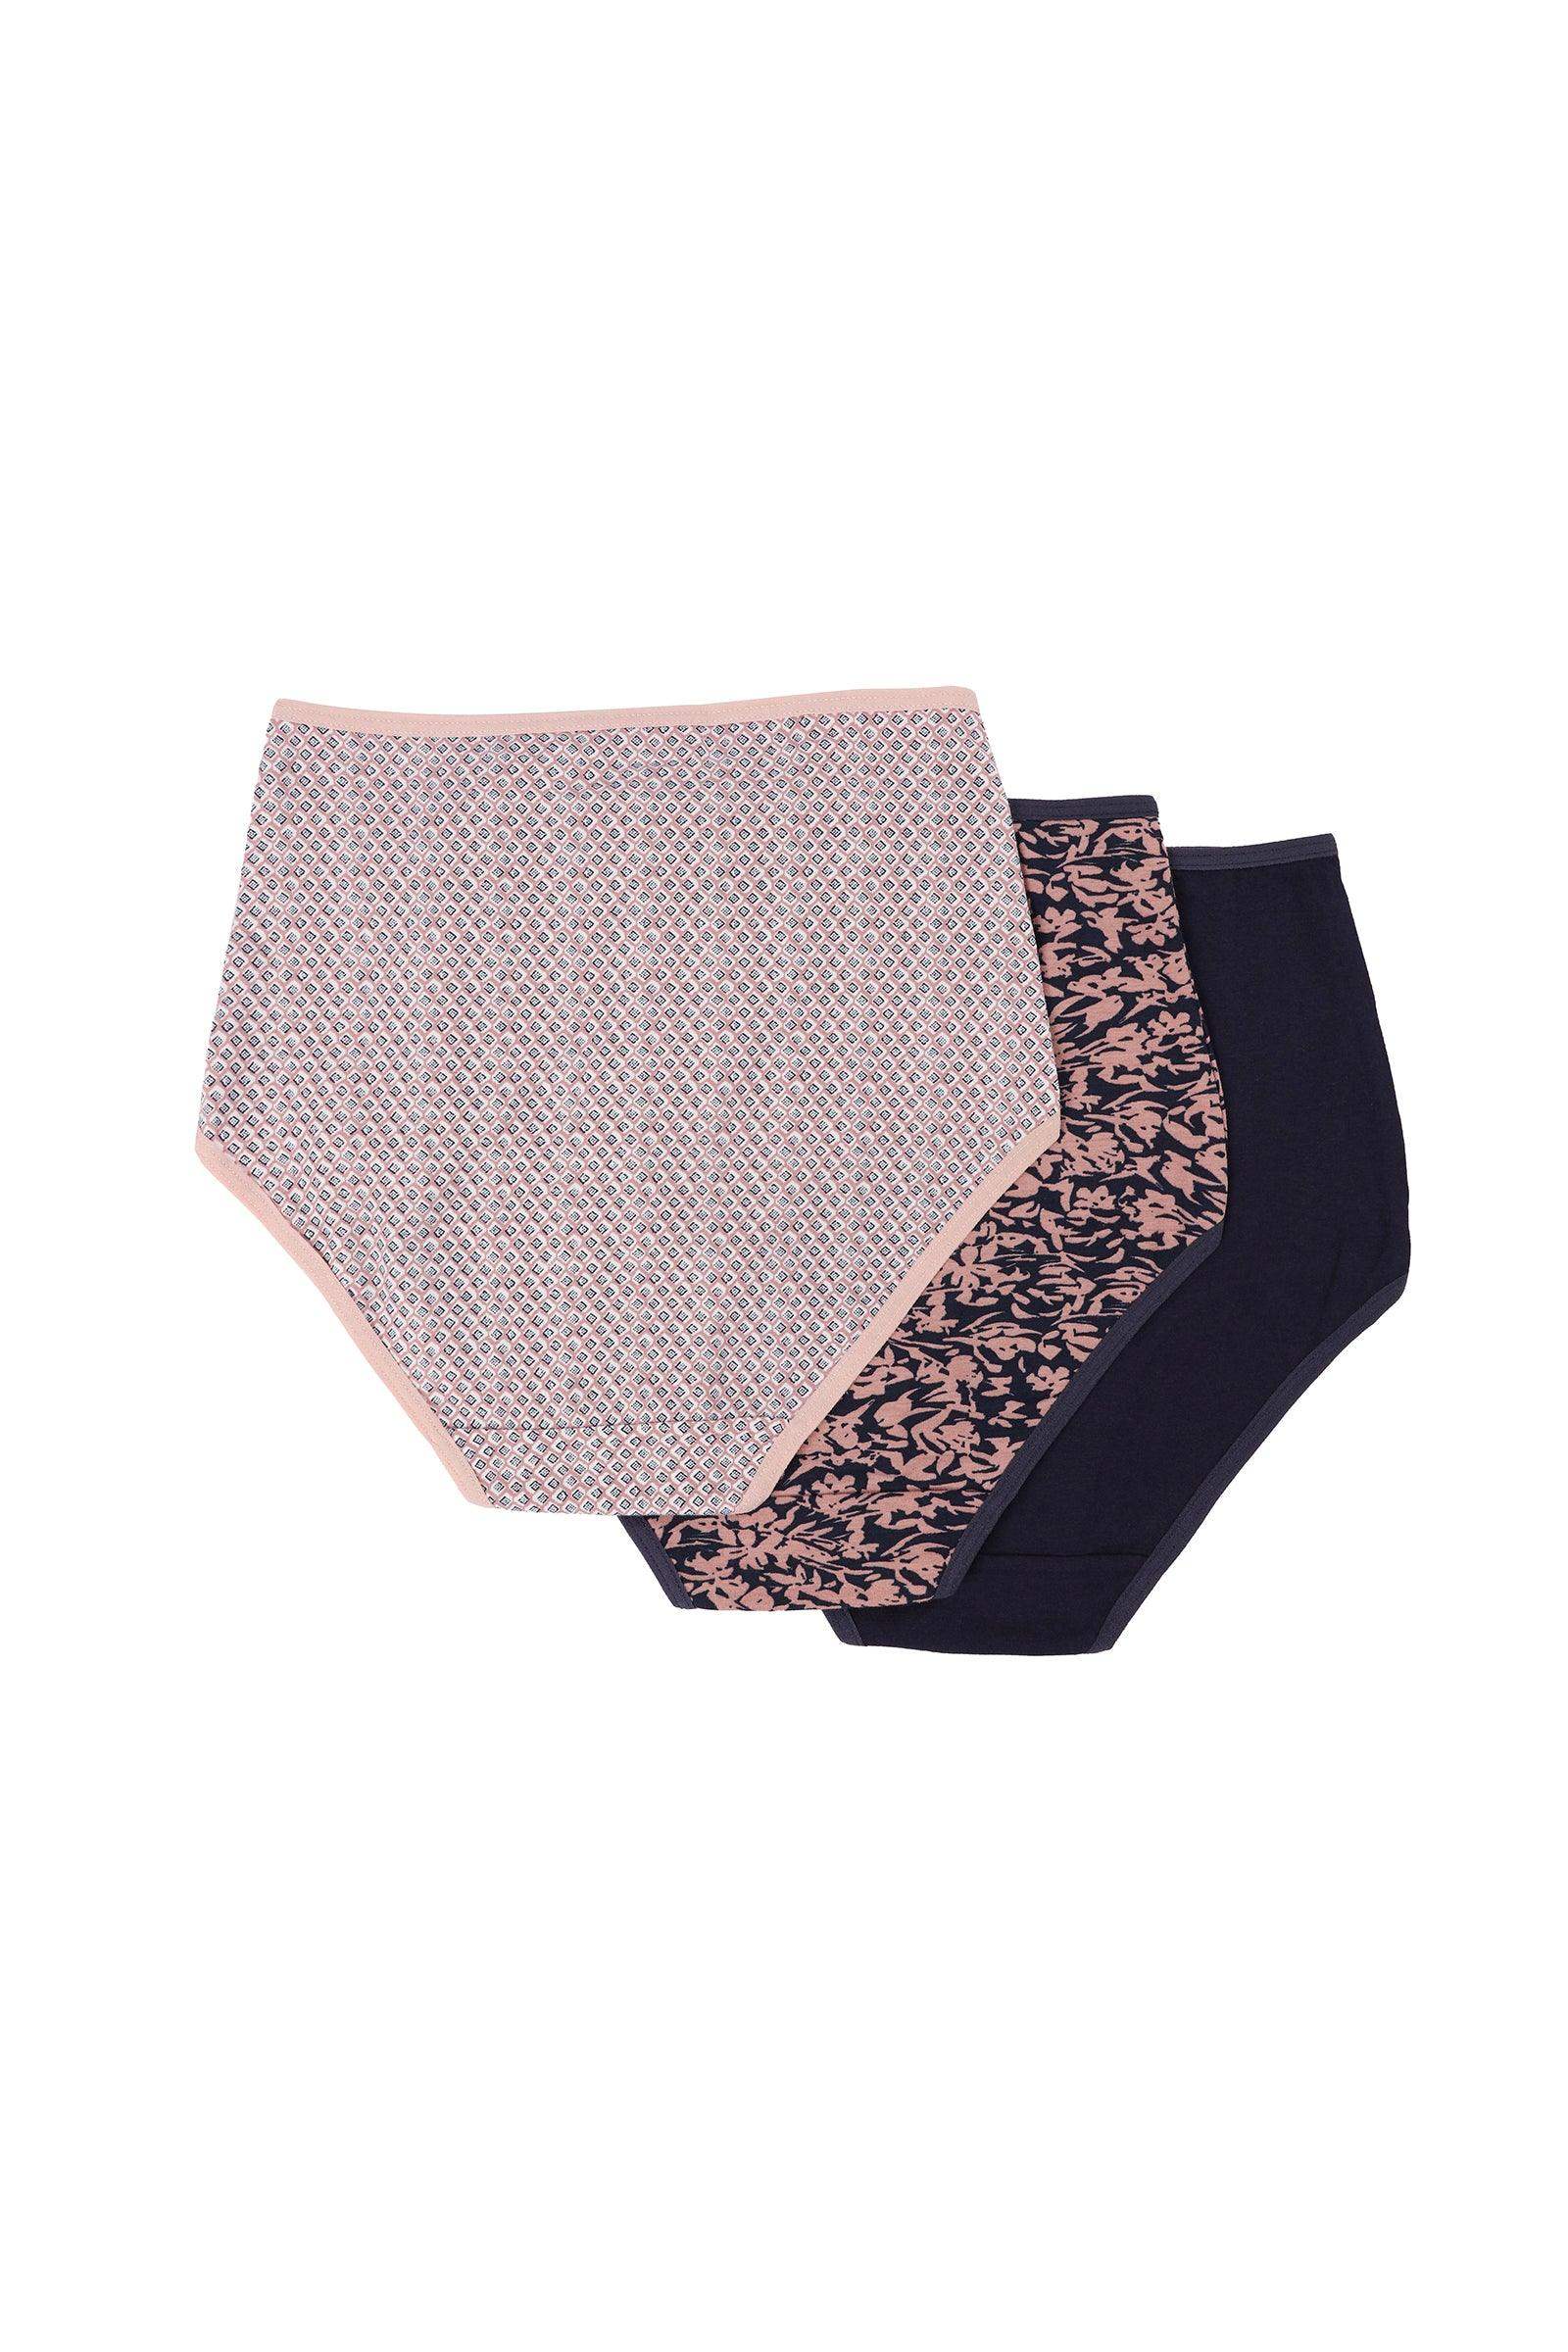 Pack of 3 Colored Full Brief - Carina - كارينا